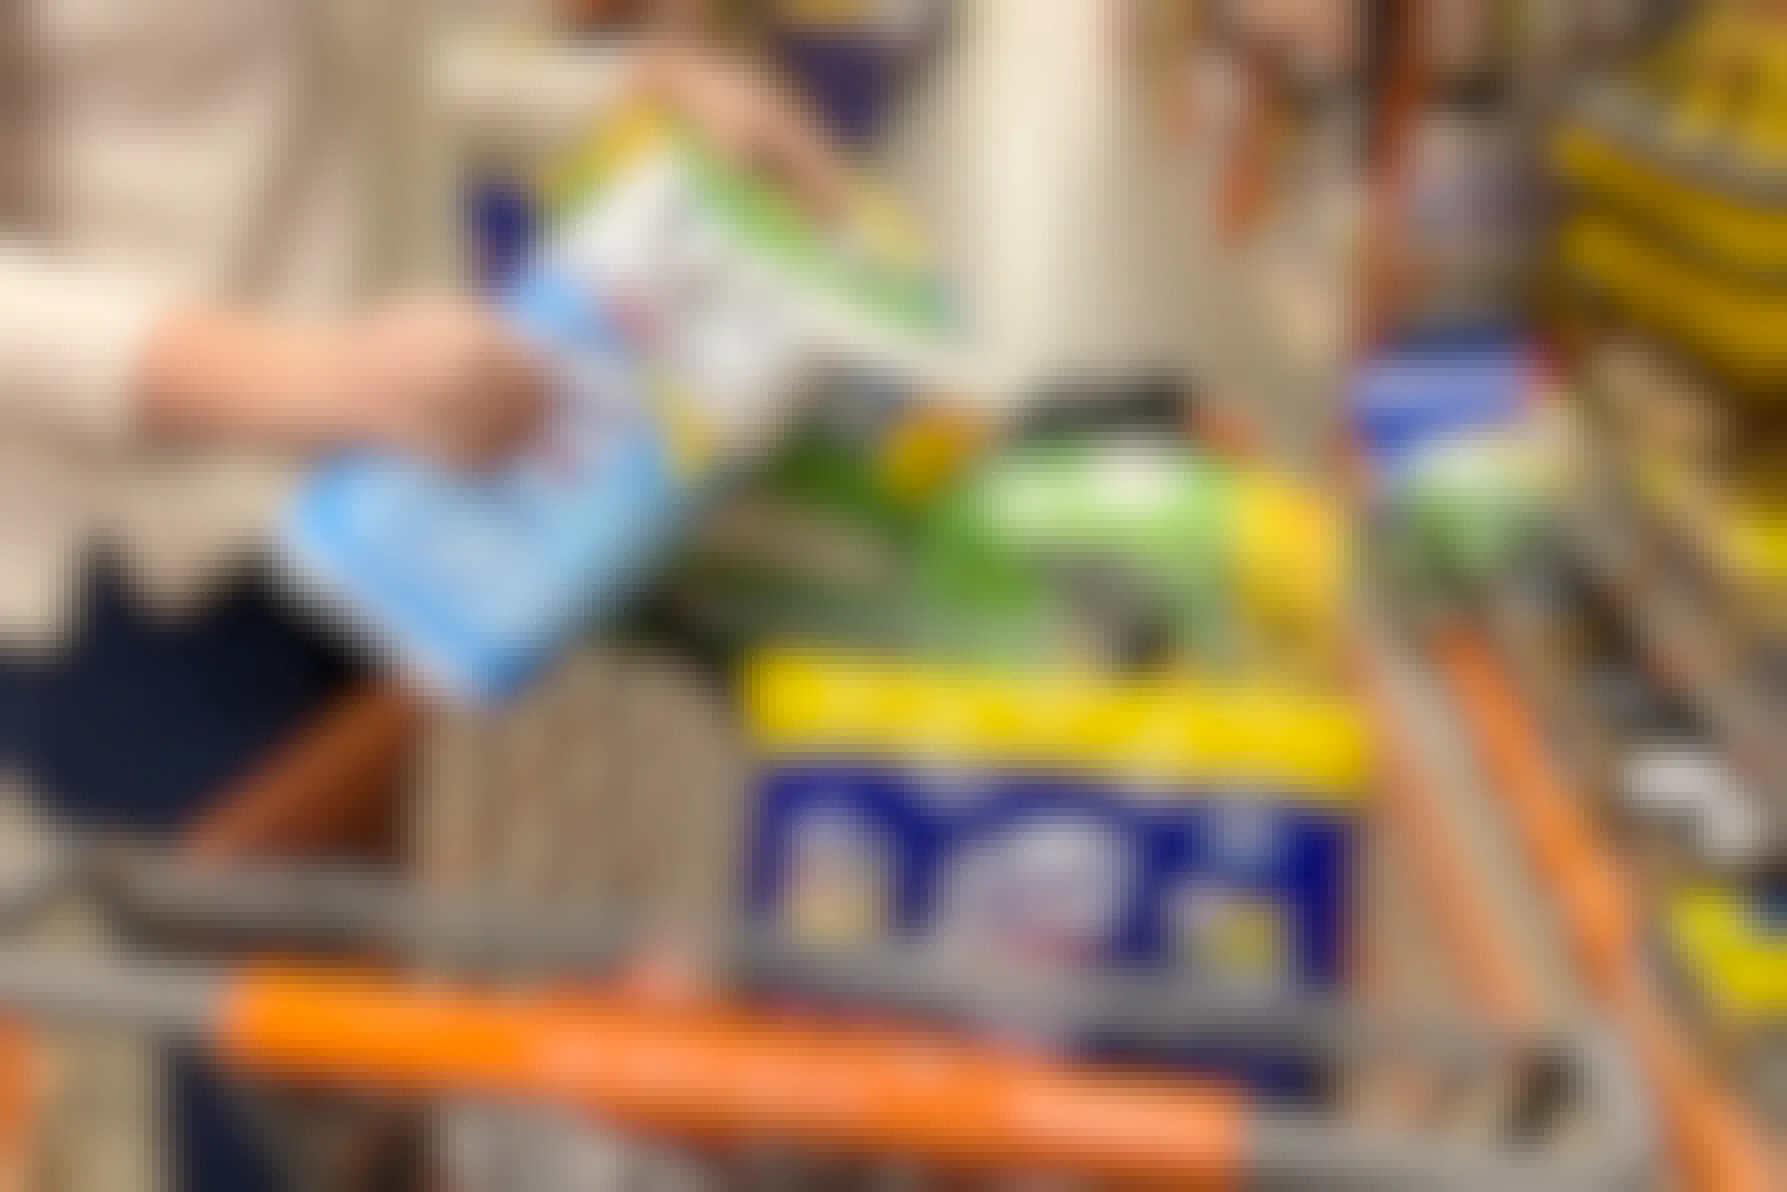 A Home Depot cart filled with cleaning supplies.